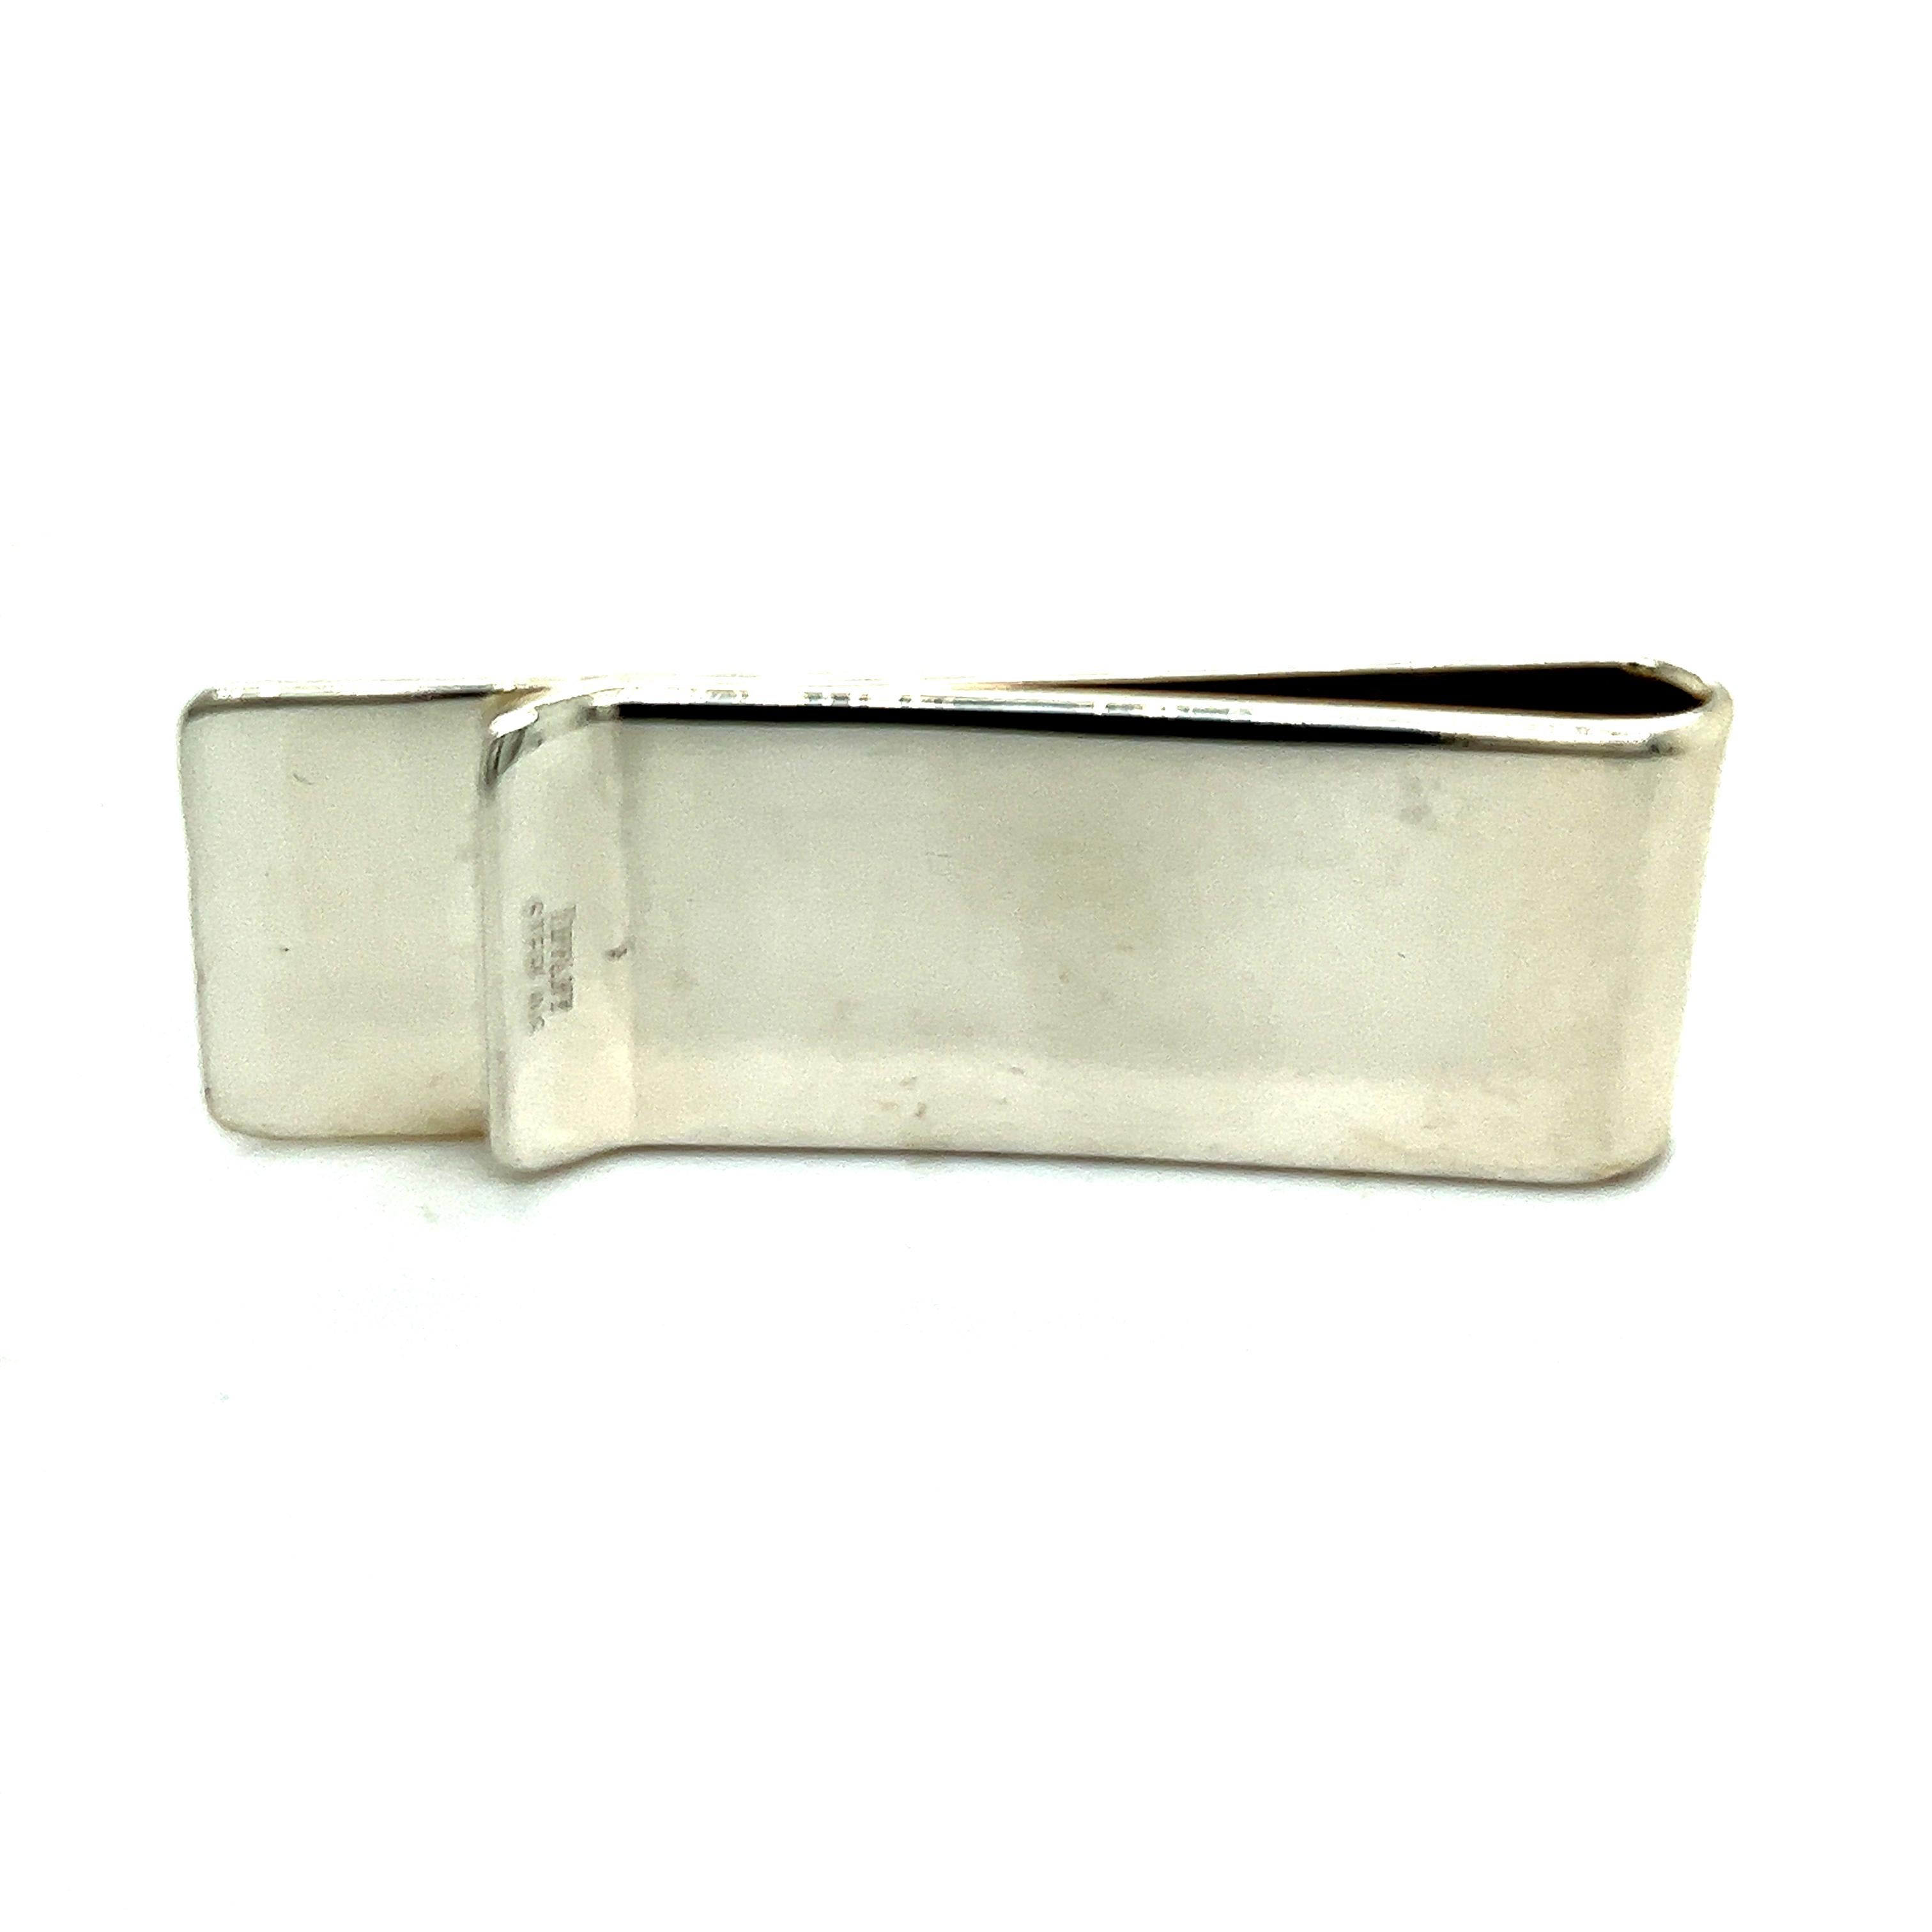 Tiffany & Co Estate Honey Comb Pattern Money Clip Silver TIF493

TRUSTED SELLER SINCE 2002

PLEASE SEE OUR HUNDREDS OF POSITIVE FEEDBACKS FROM OUR CLIENTS!!

FREE SHIPPING

This elegant Authentic Tiffany & Co. Men's sterling silver money clip has a